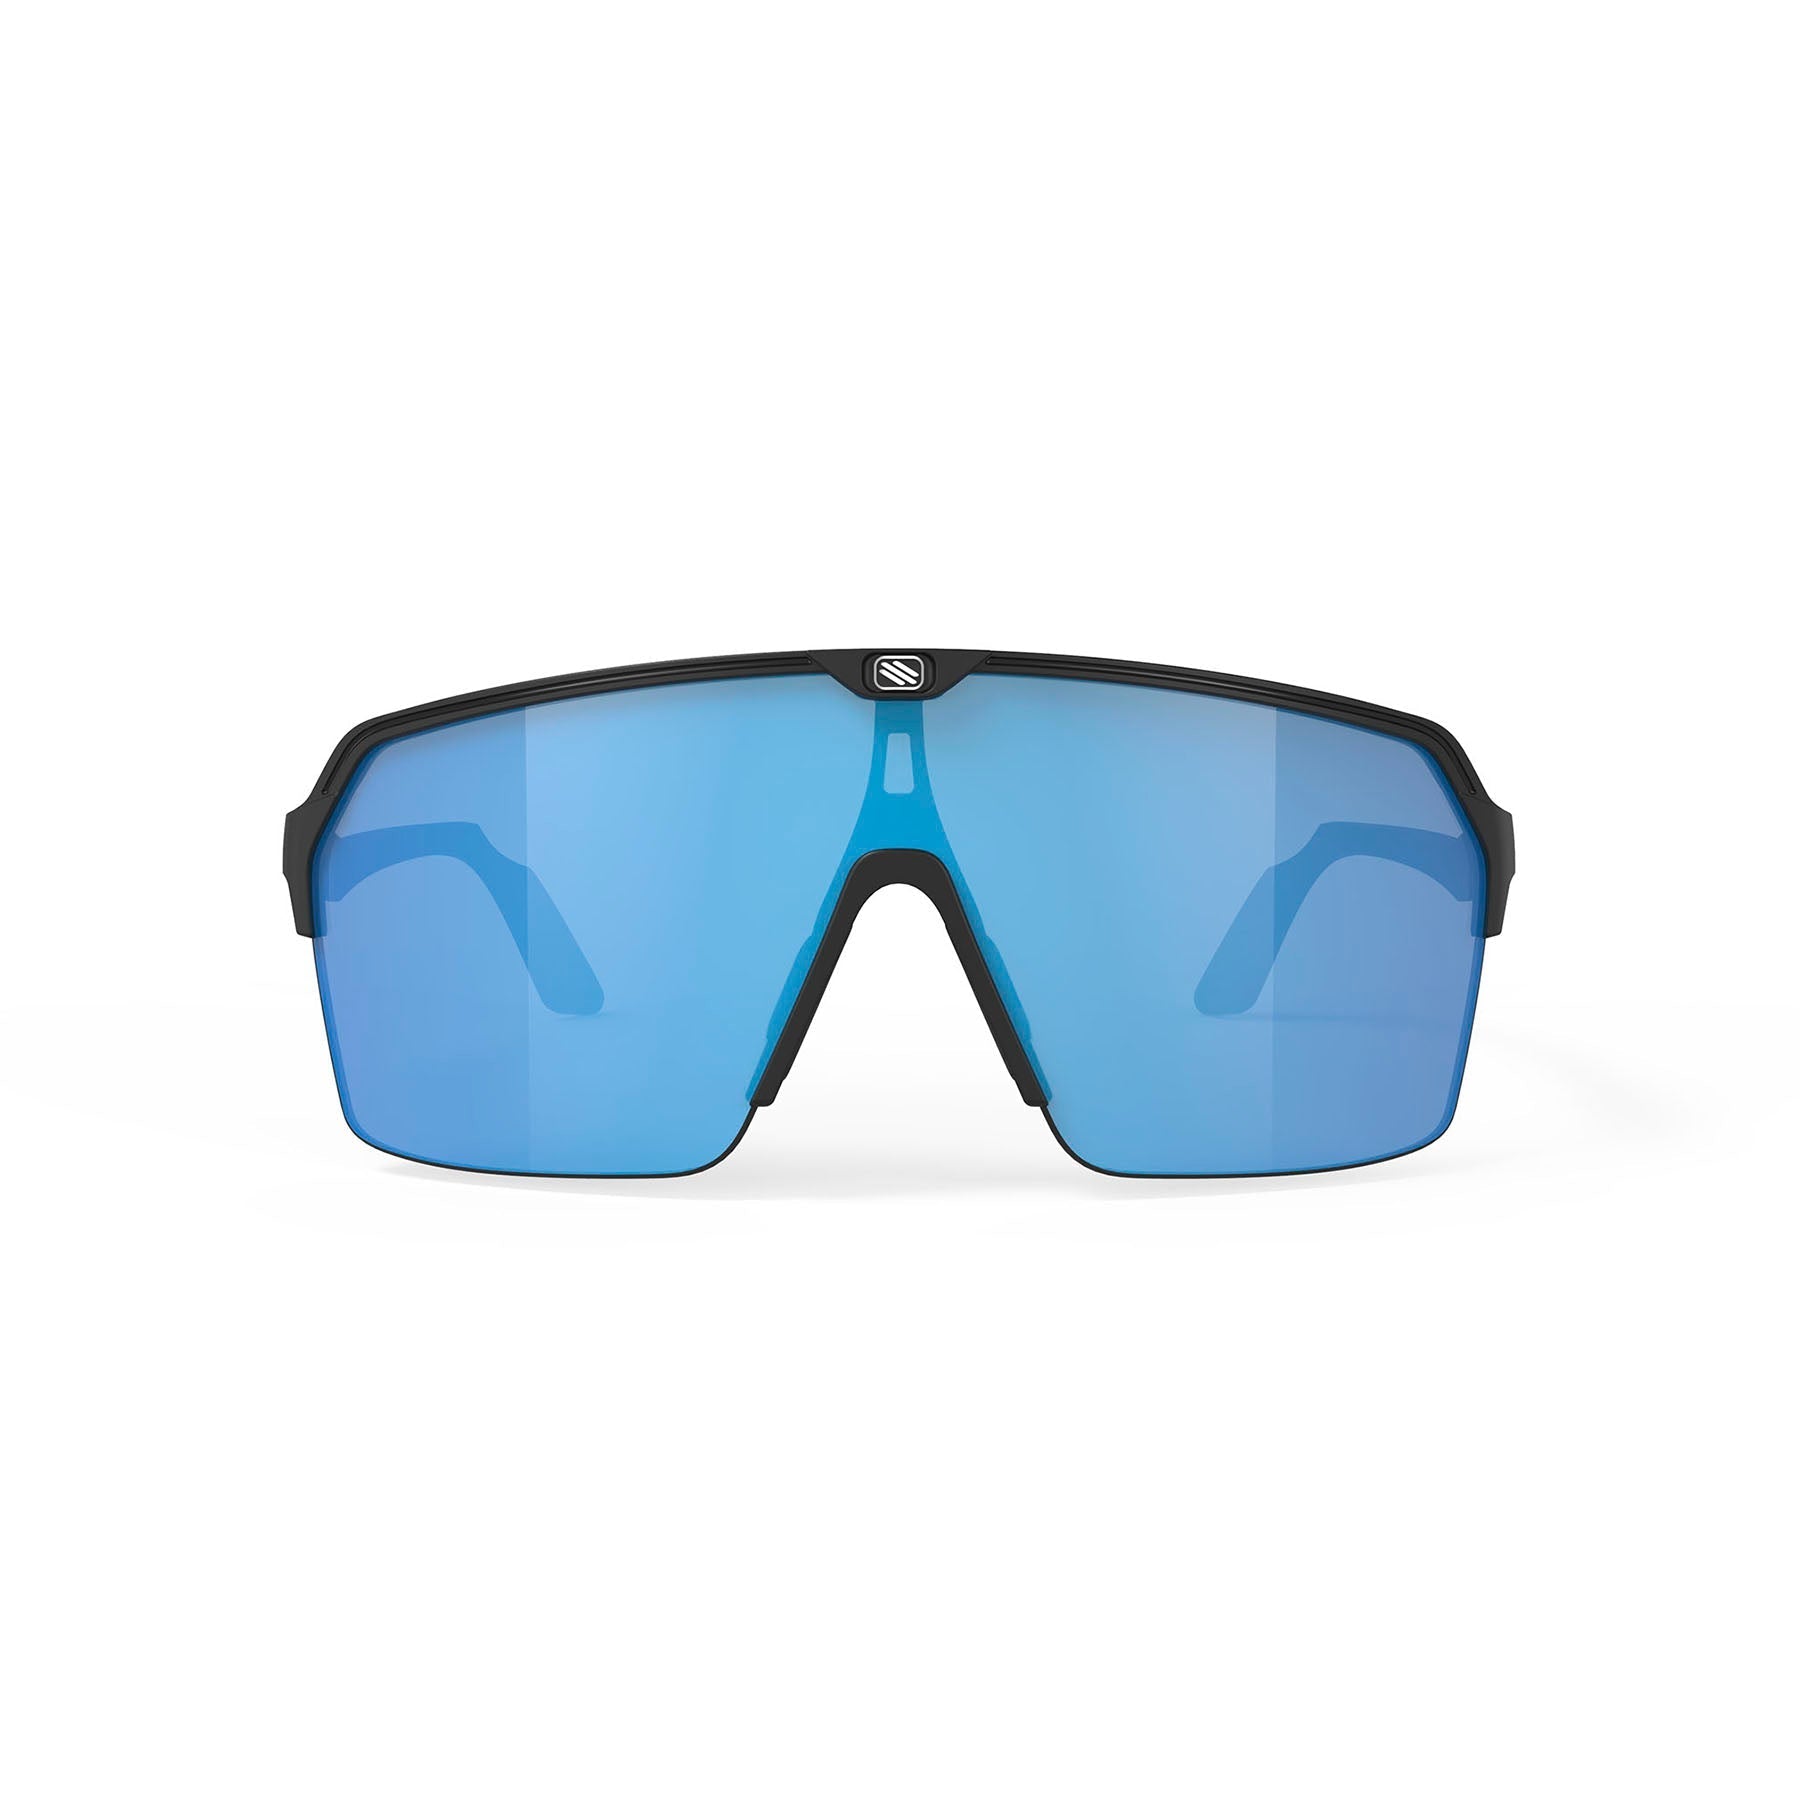 Rudy Project Spinshield Air running and cycling sport shield sunglasses#color_spinshield-air-black-matte-with-multilaser-blue-lenses